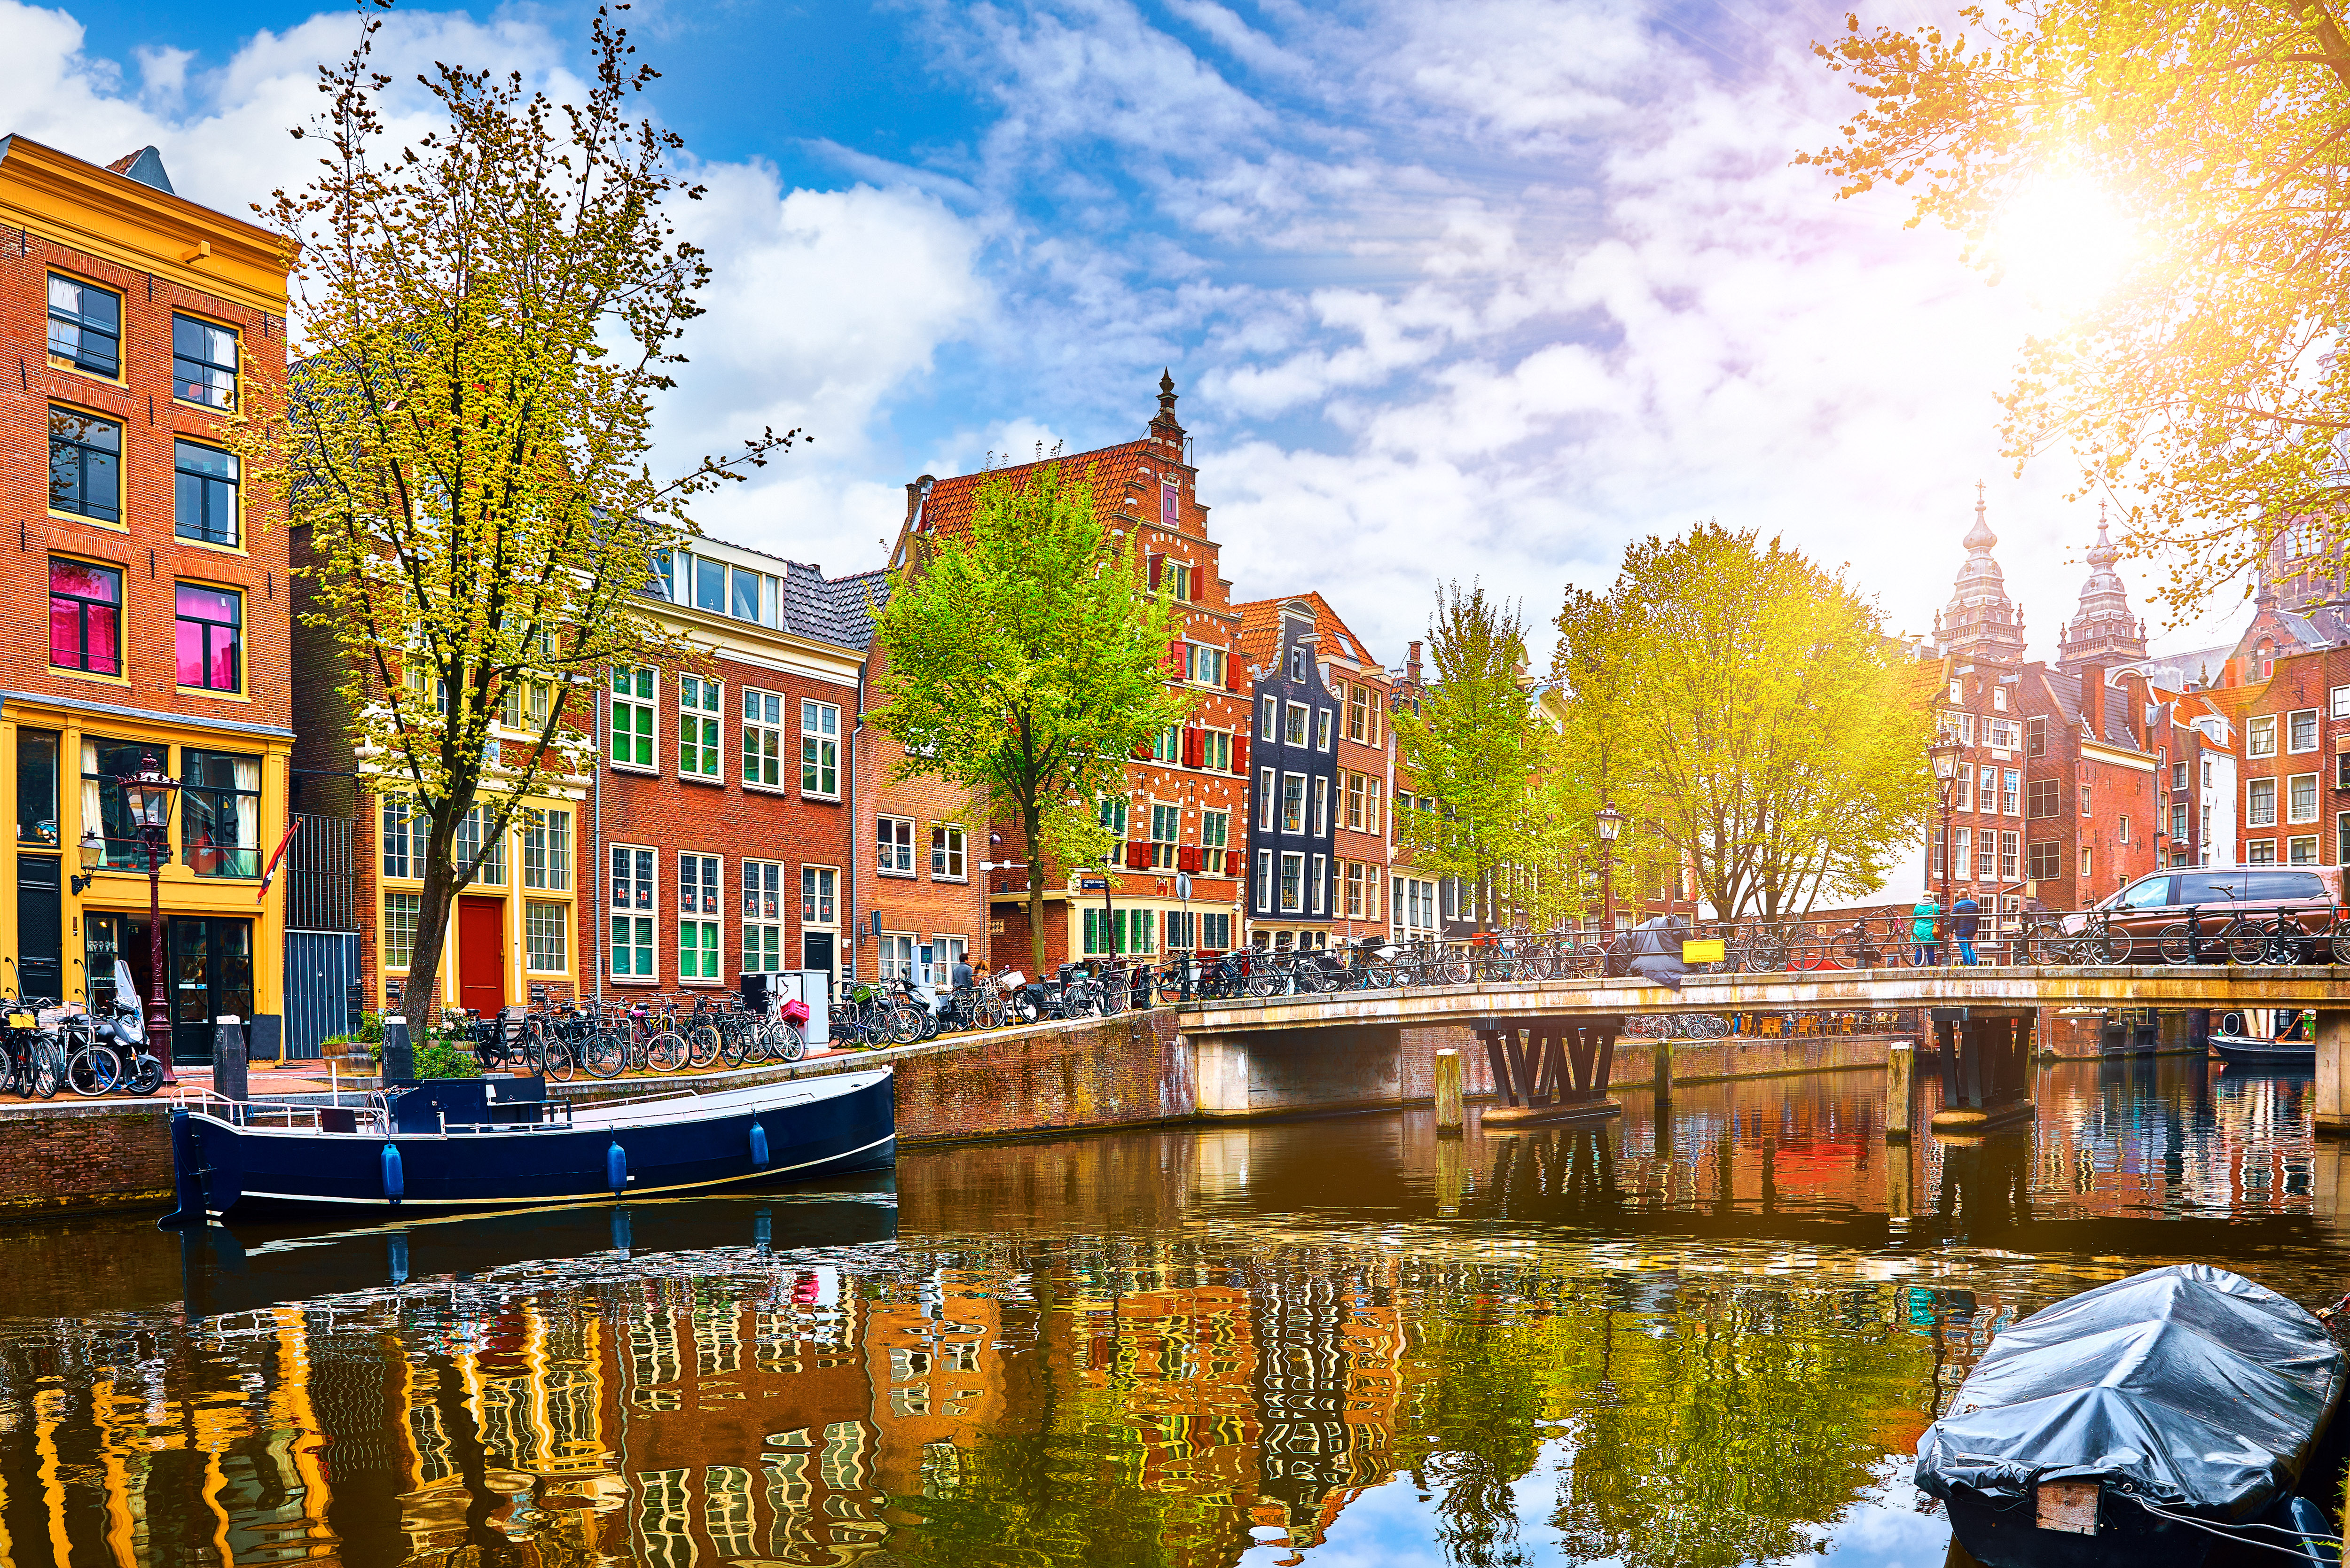 Amsterdam is set to have a brand-new attraction